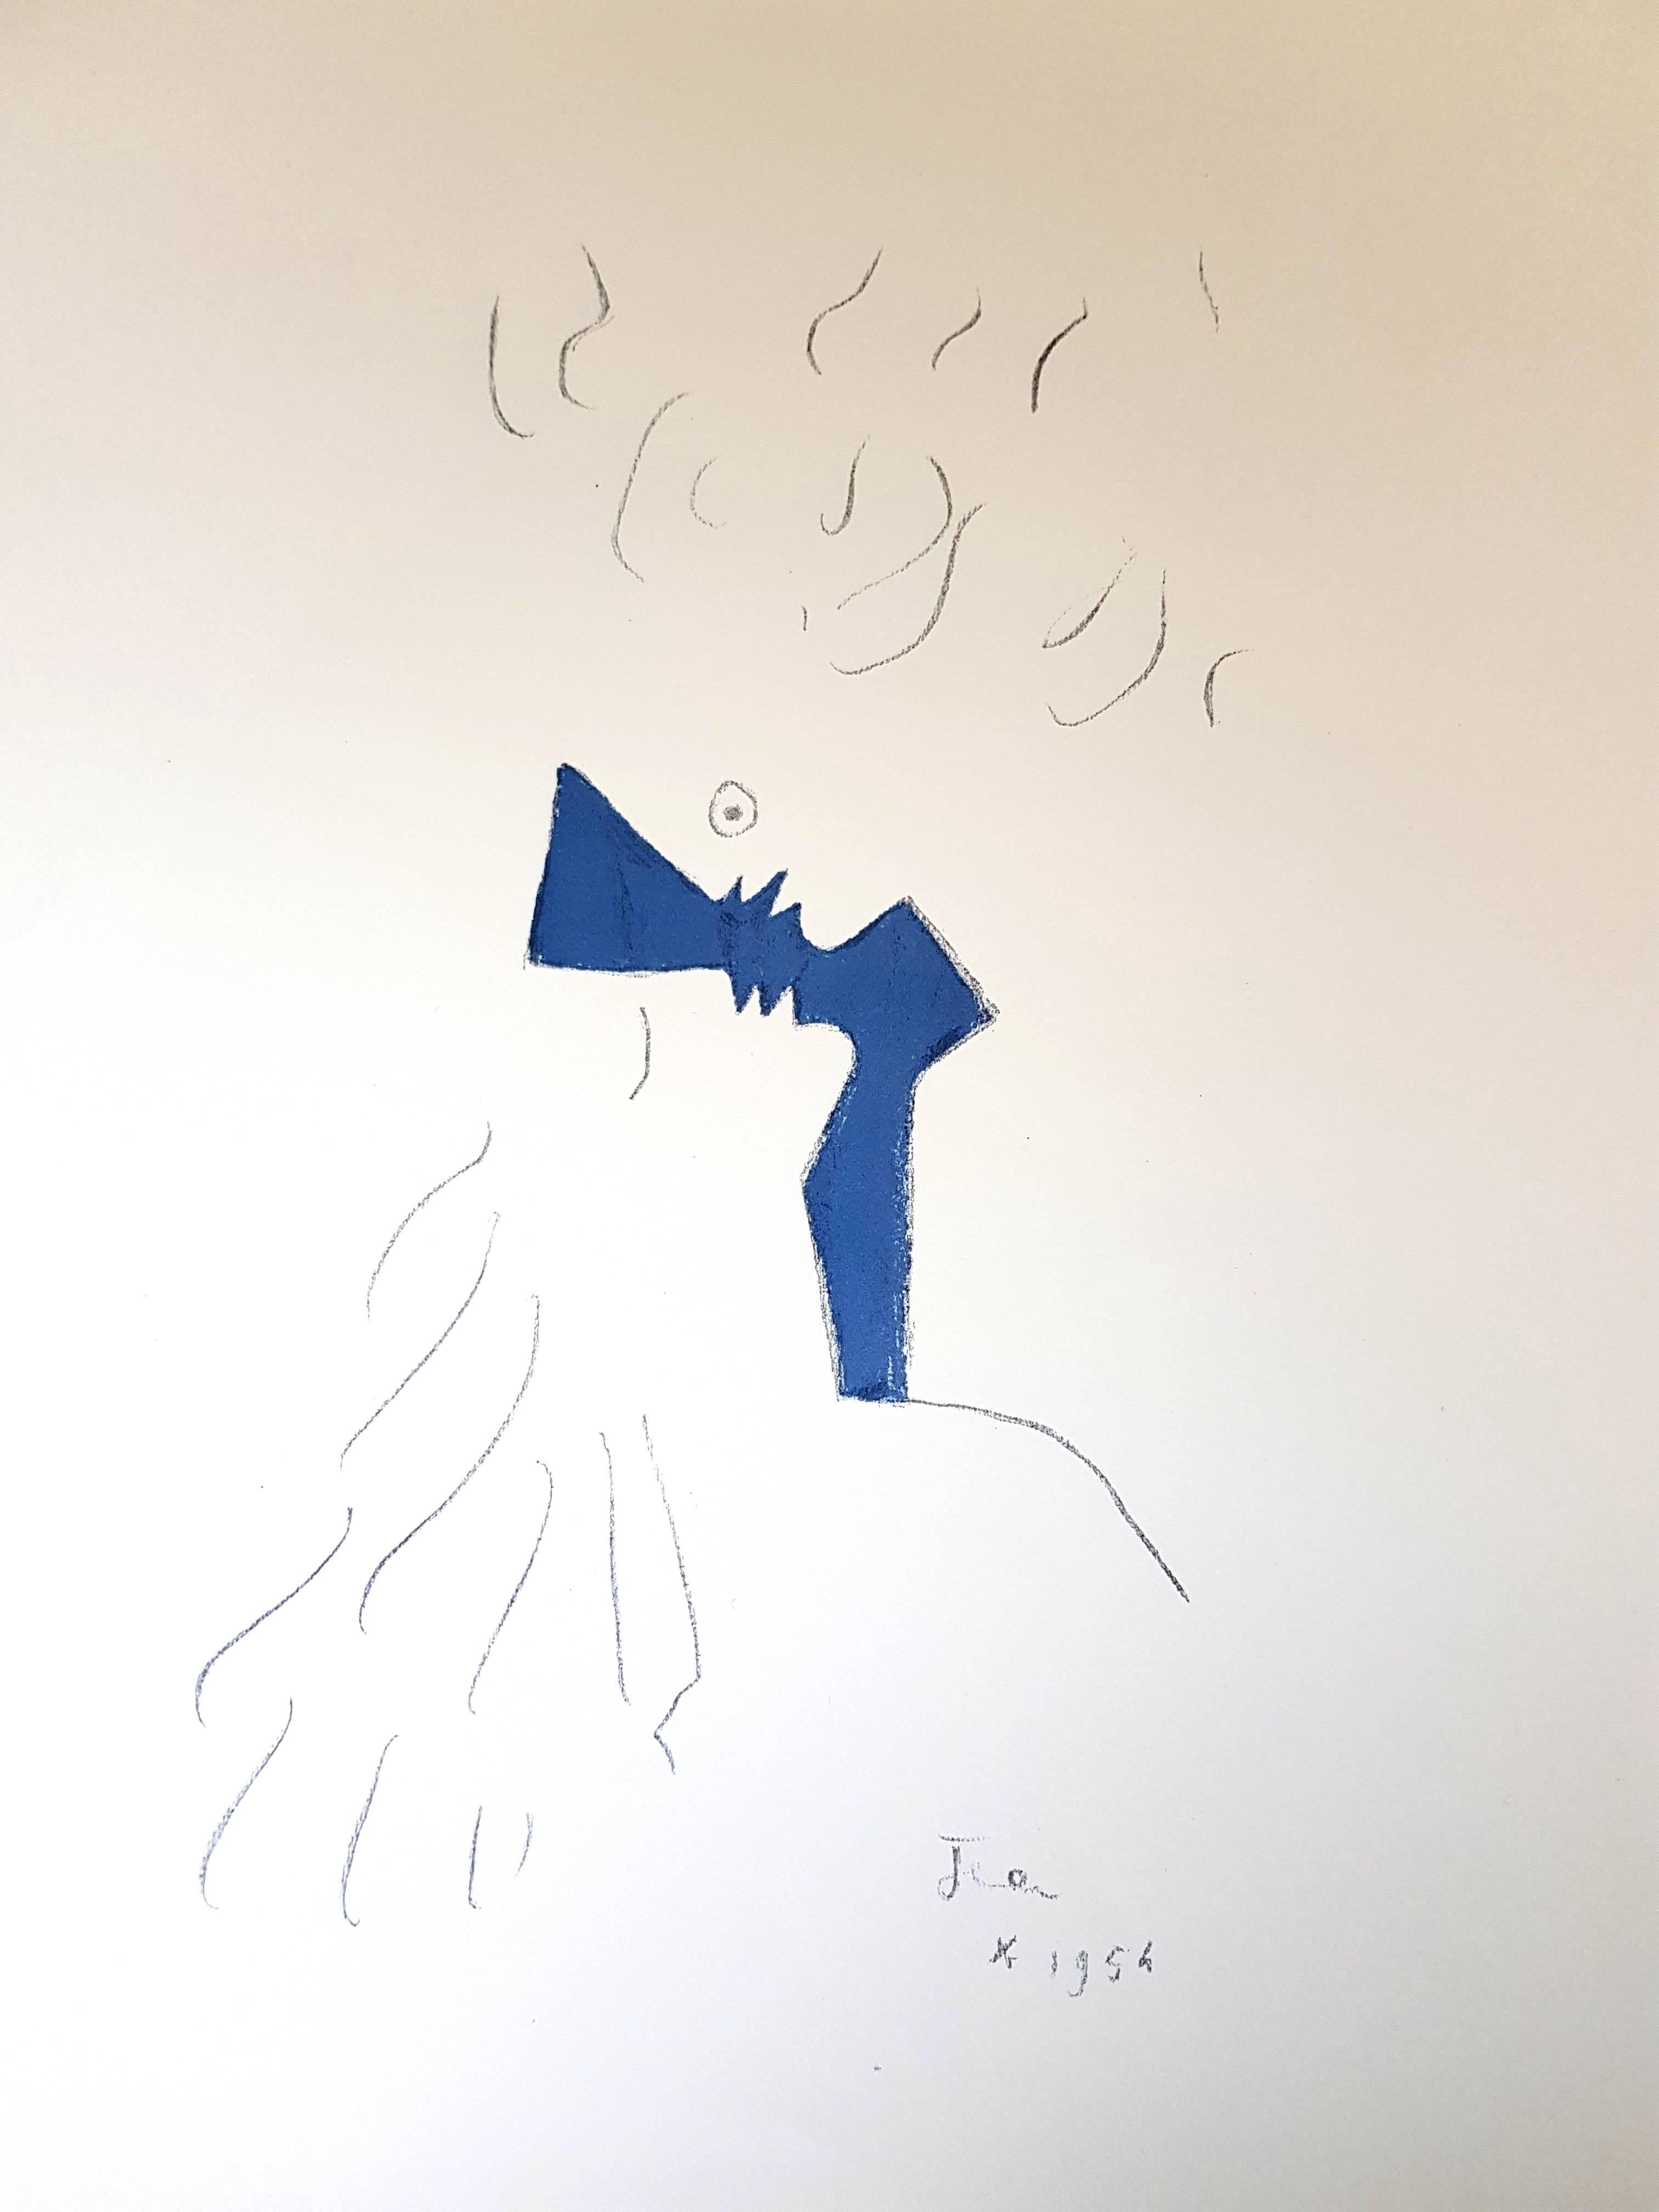 Jean Cocteau - Under the Fire Coat - Lovers - Original Lithograph
Signed &quot;Jean&quot; in the plate and dated 1954 in the plate.
Joseph Forêt Editions
Dimensions: 41 x 33 cm
Vellum paper.

Jean Cocteau

Writer, artist and film director Jean